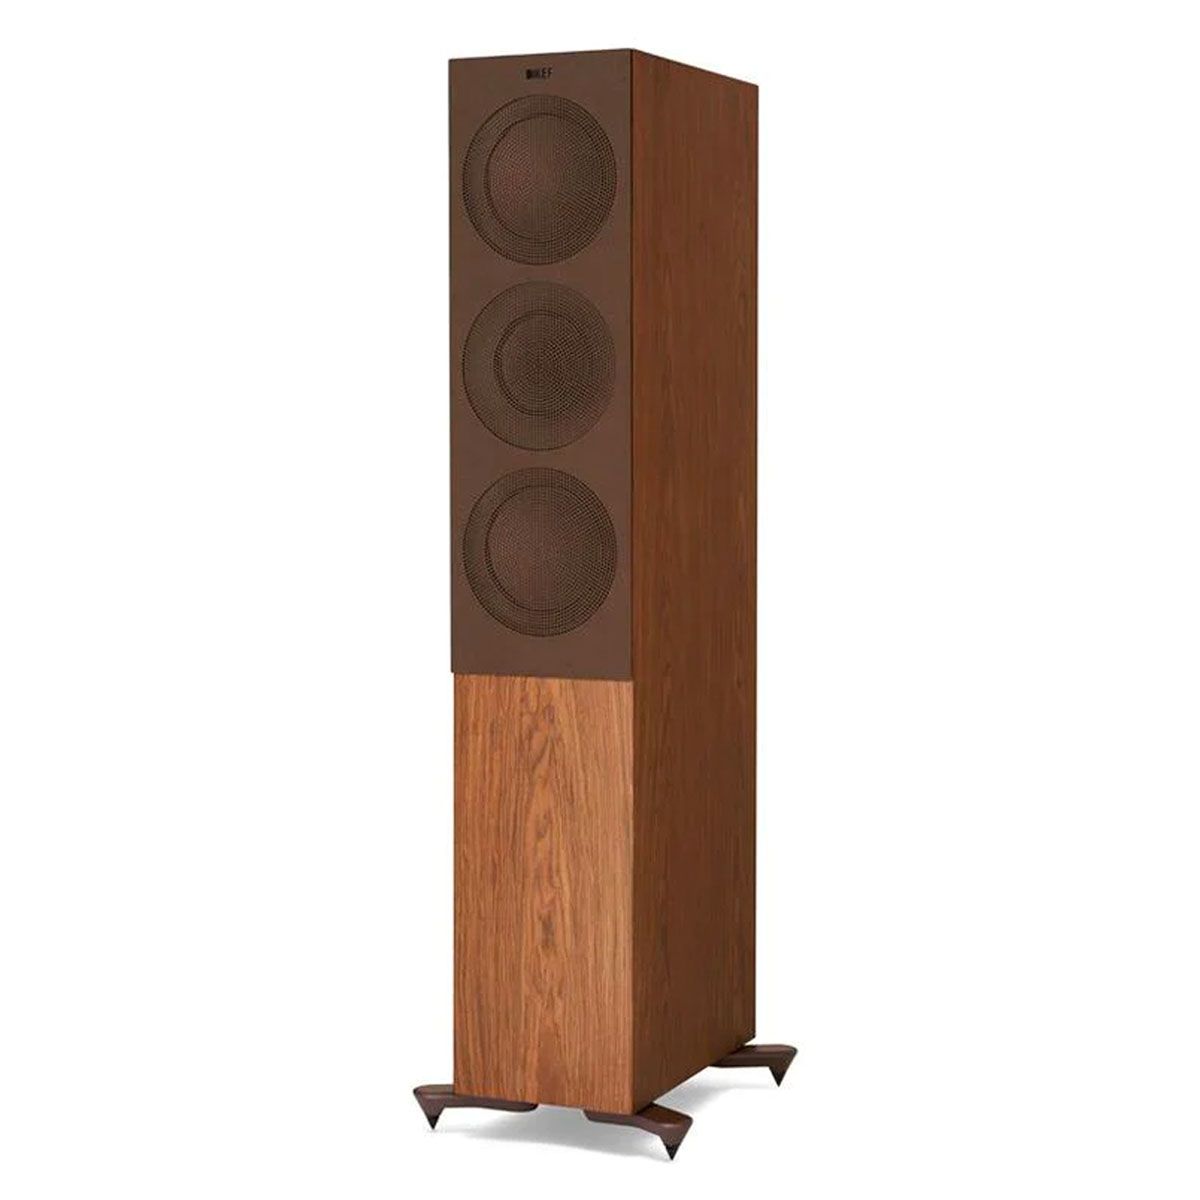 KEF R7 Floorstanding Loudspeaker - Walnut - angled front view with grille